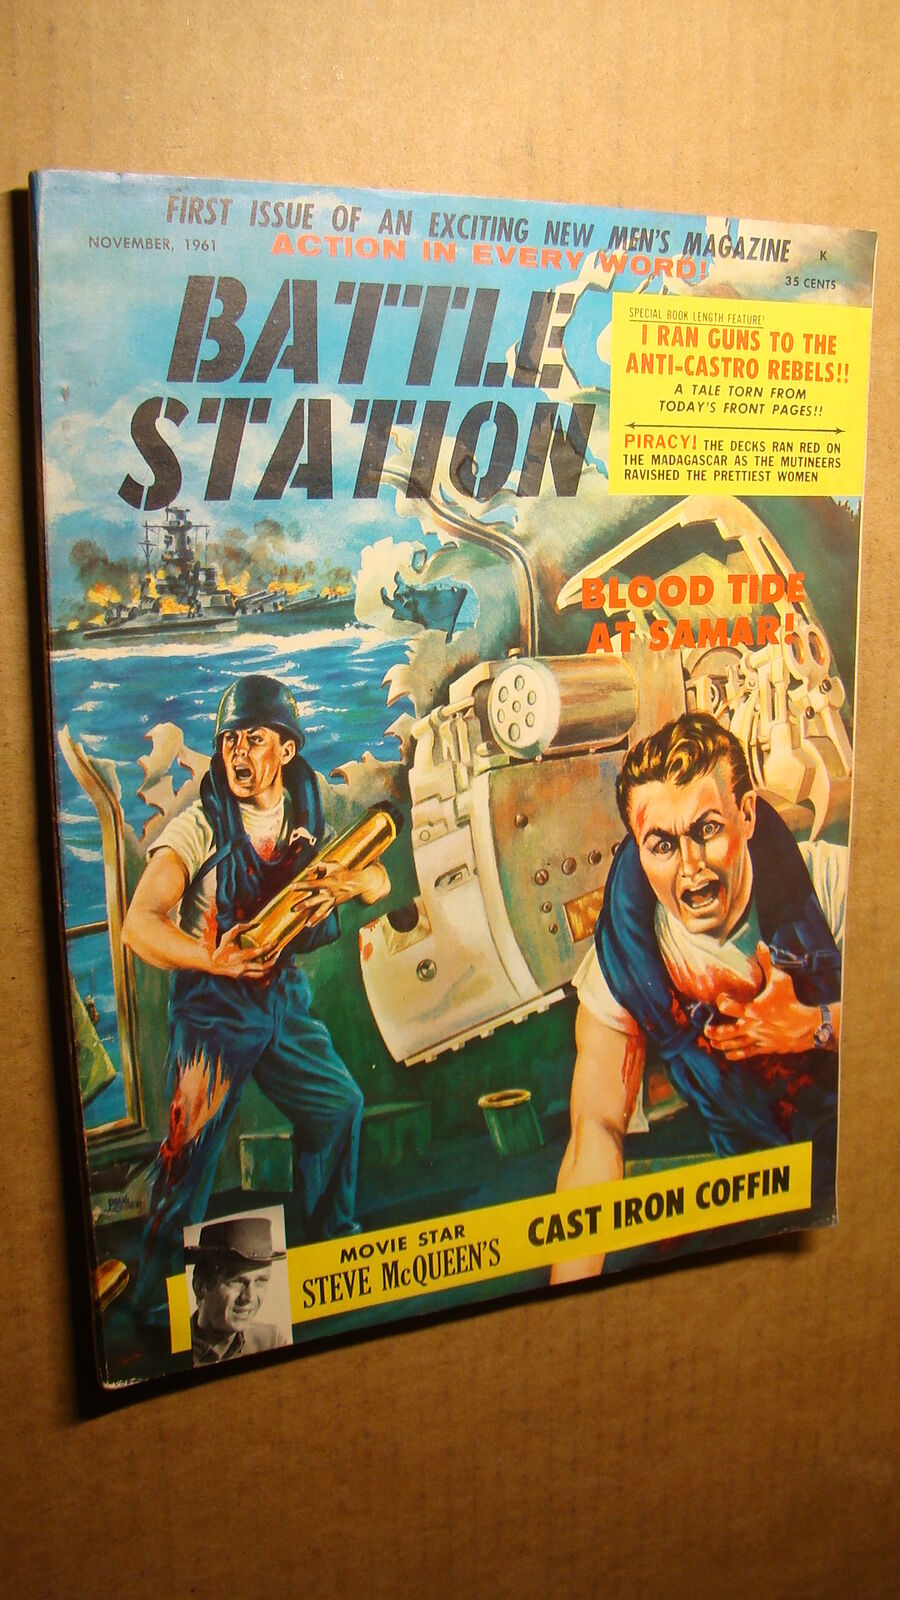 MEN'S ADVENTURE MAG - BATTLE STATION 1 *SOLID* 1961 CAST IRON COFFIN SEX AT SEA